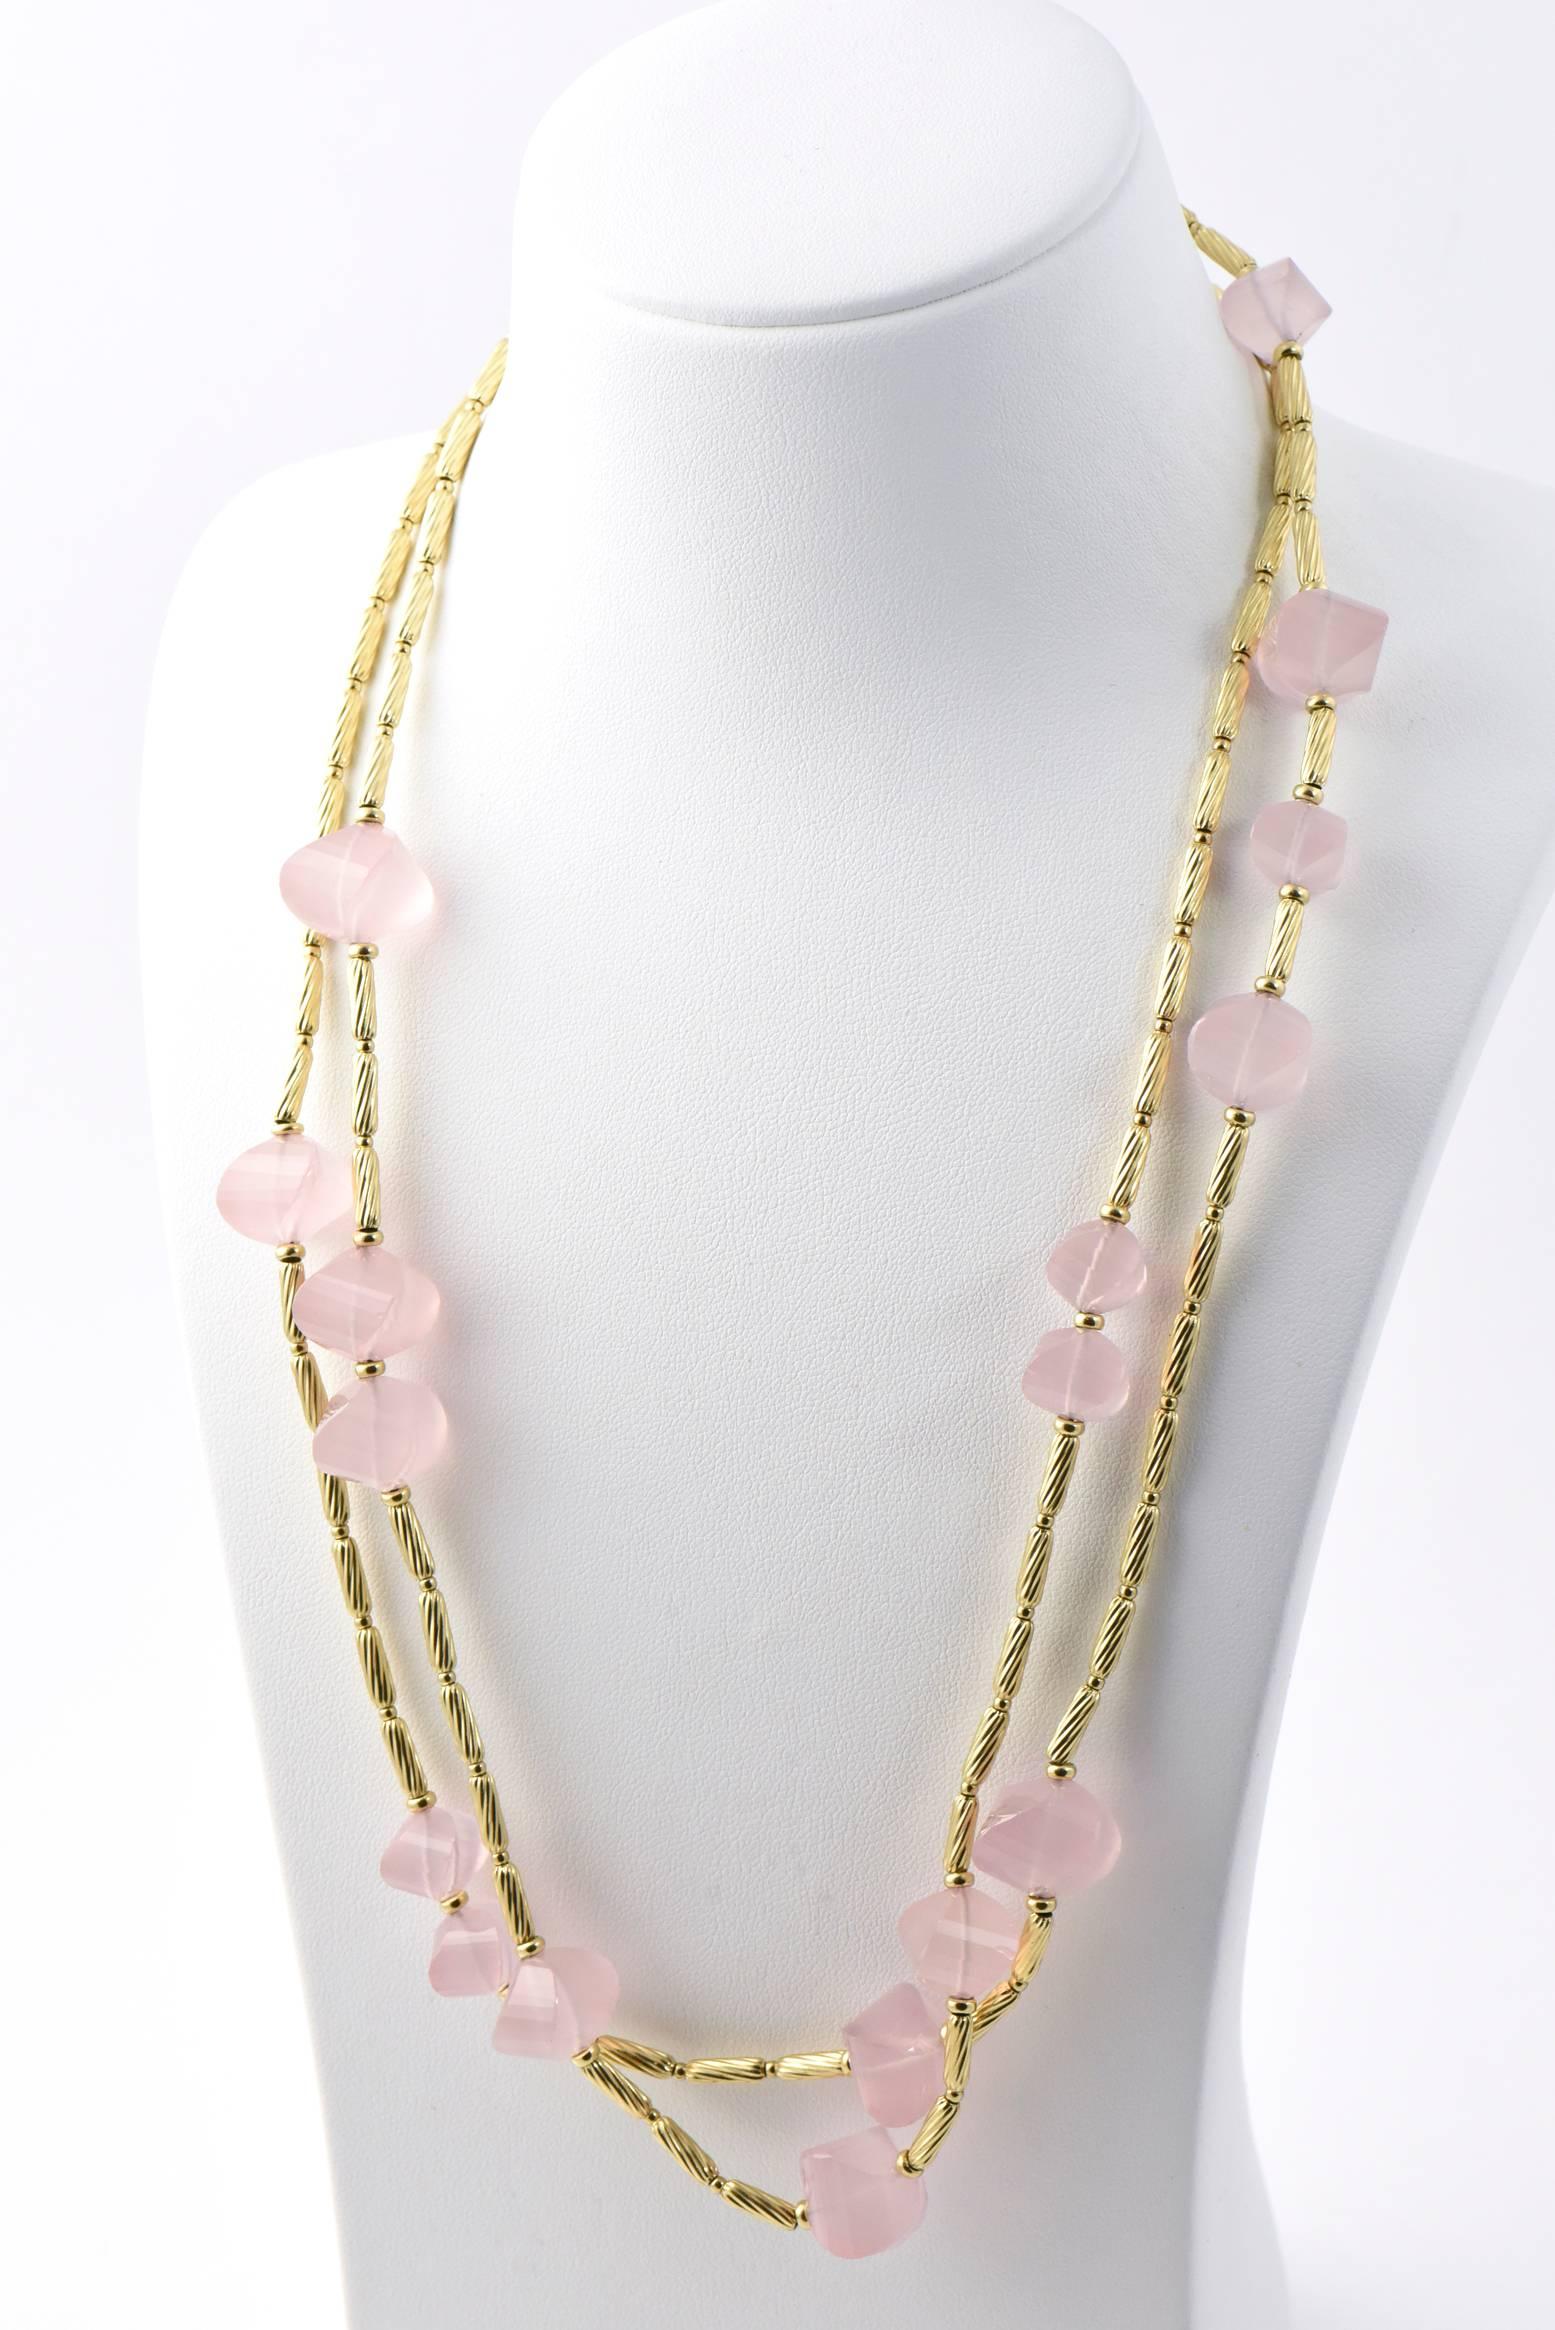 David Yurman Rose Quartz and Gold Long Necklace In Good Condition For Sale In Miami Beach, FL